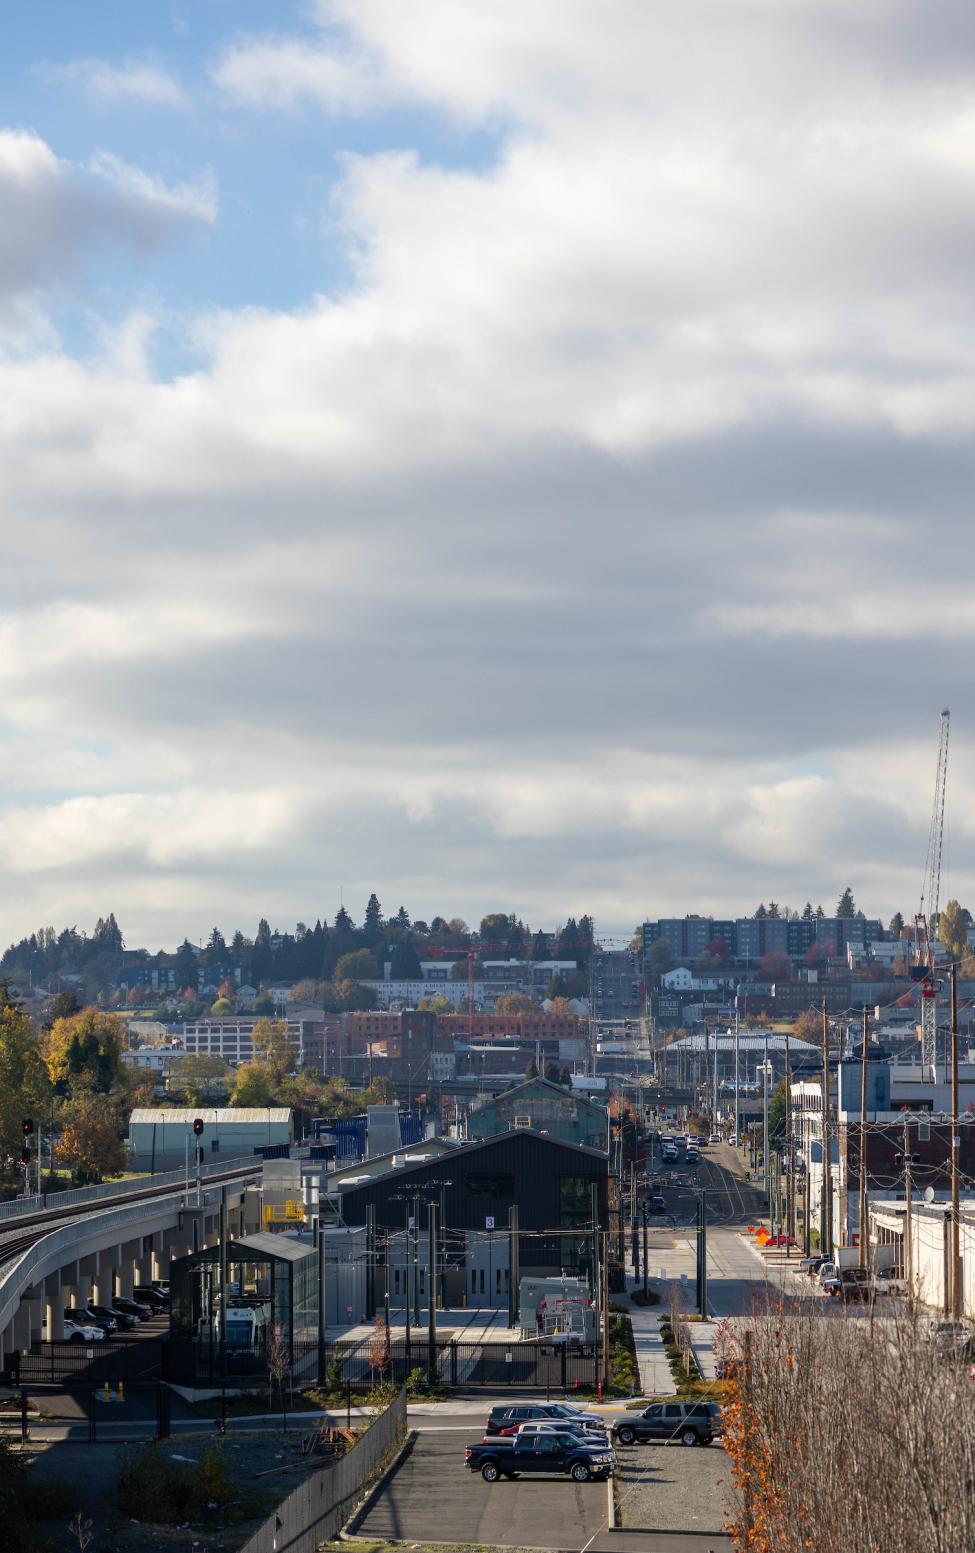 A shot of Tacoma, with trees with changing leaves and a cloudy sky.